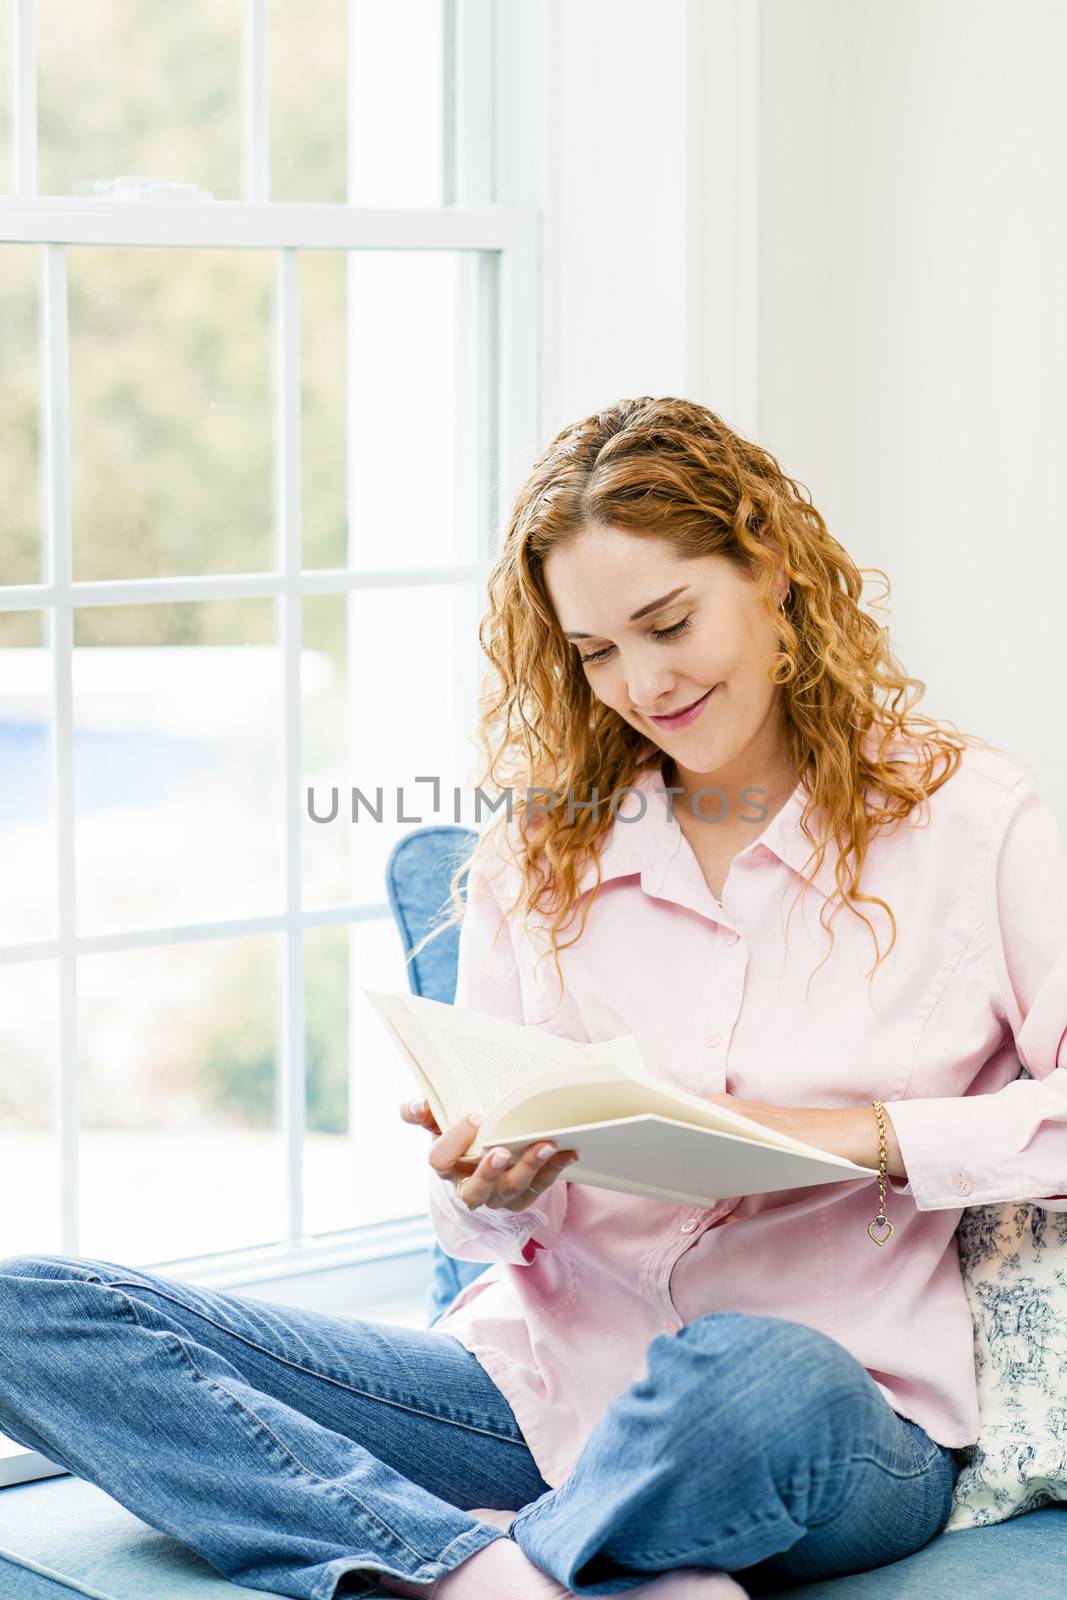 Smiling caucasian woman reading book by window at home